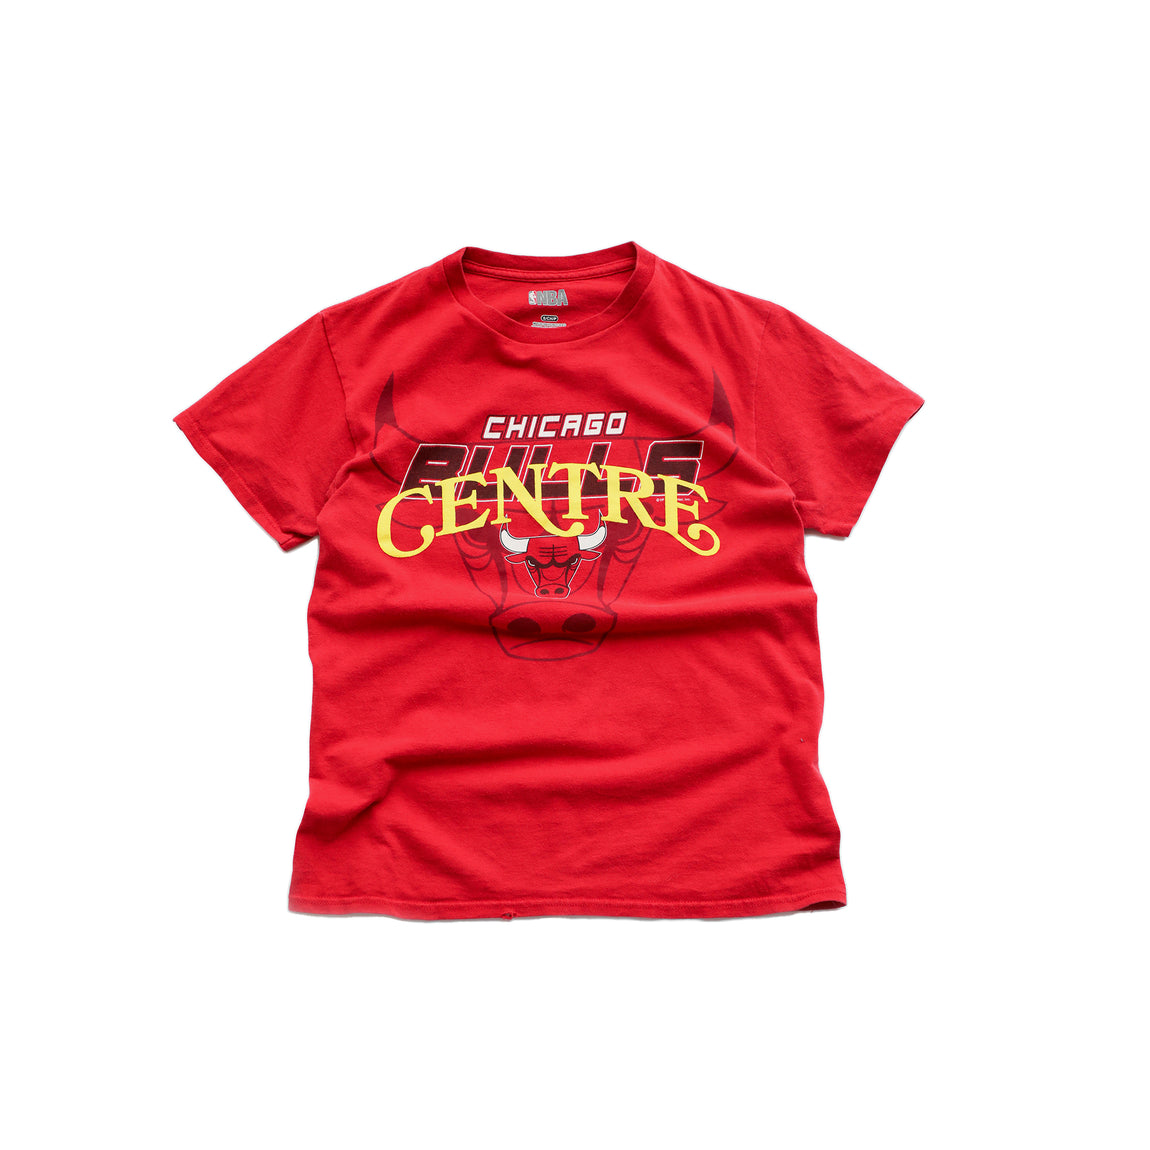 Centre Upcycled Bulls Tee (Red) - Centre Upcycled Bulls Tee (Red) - 